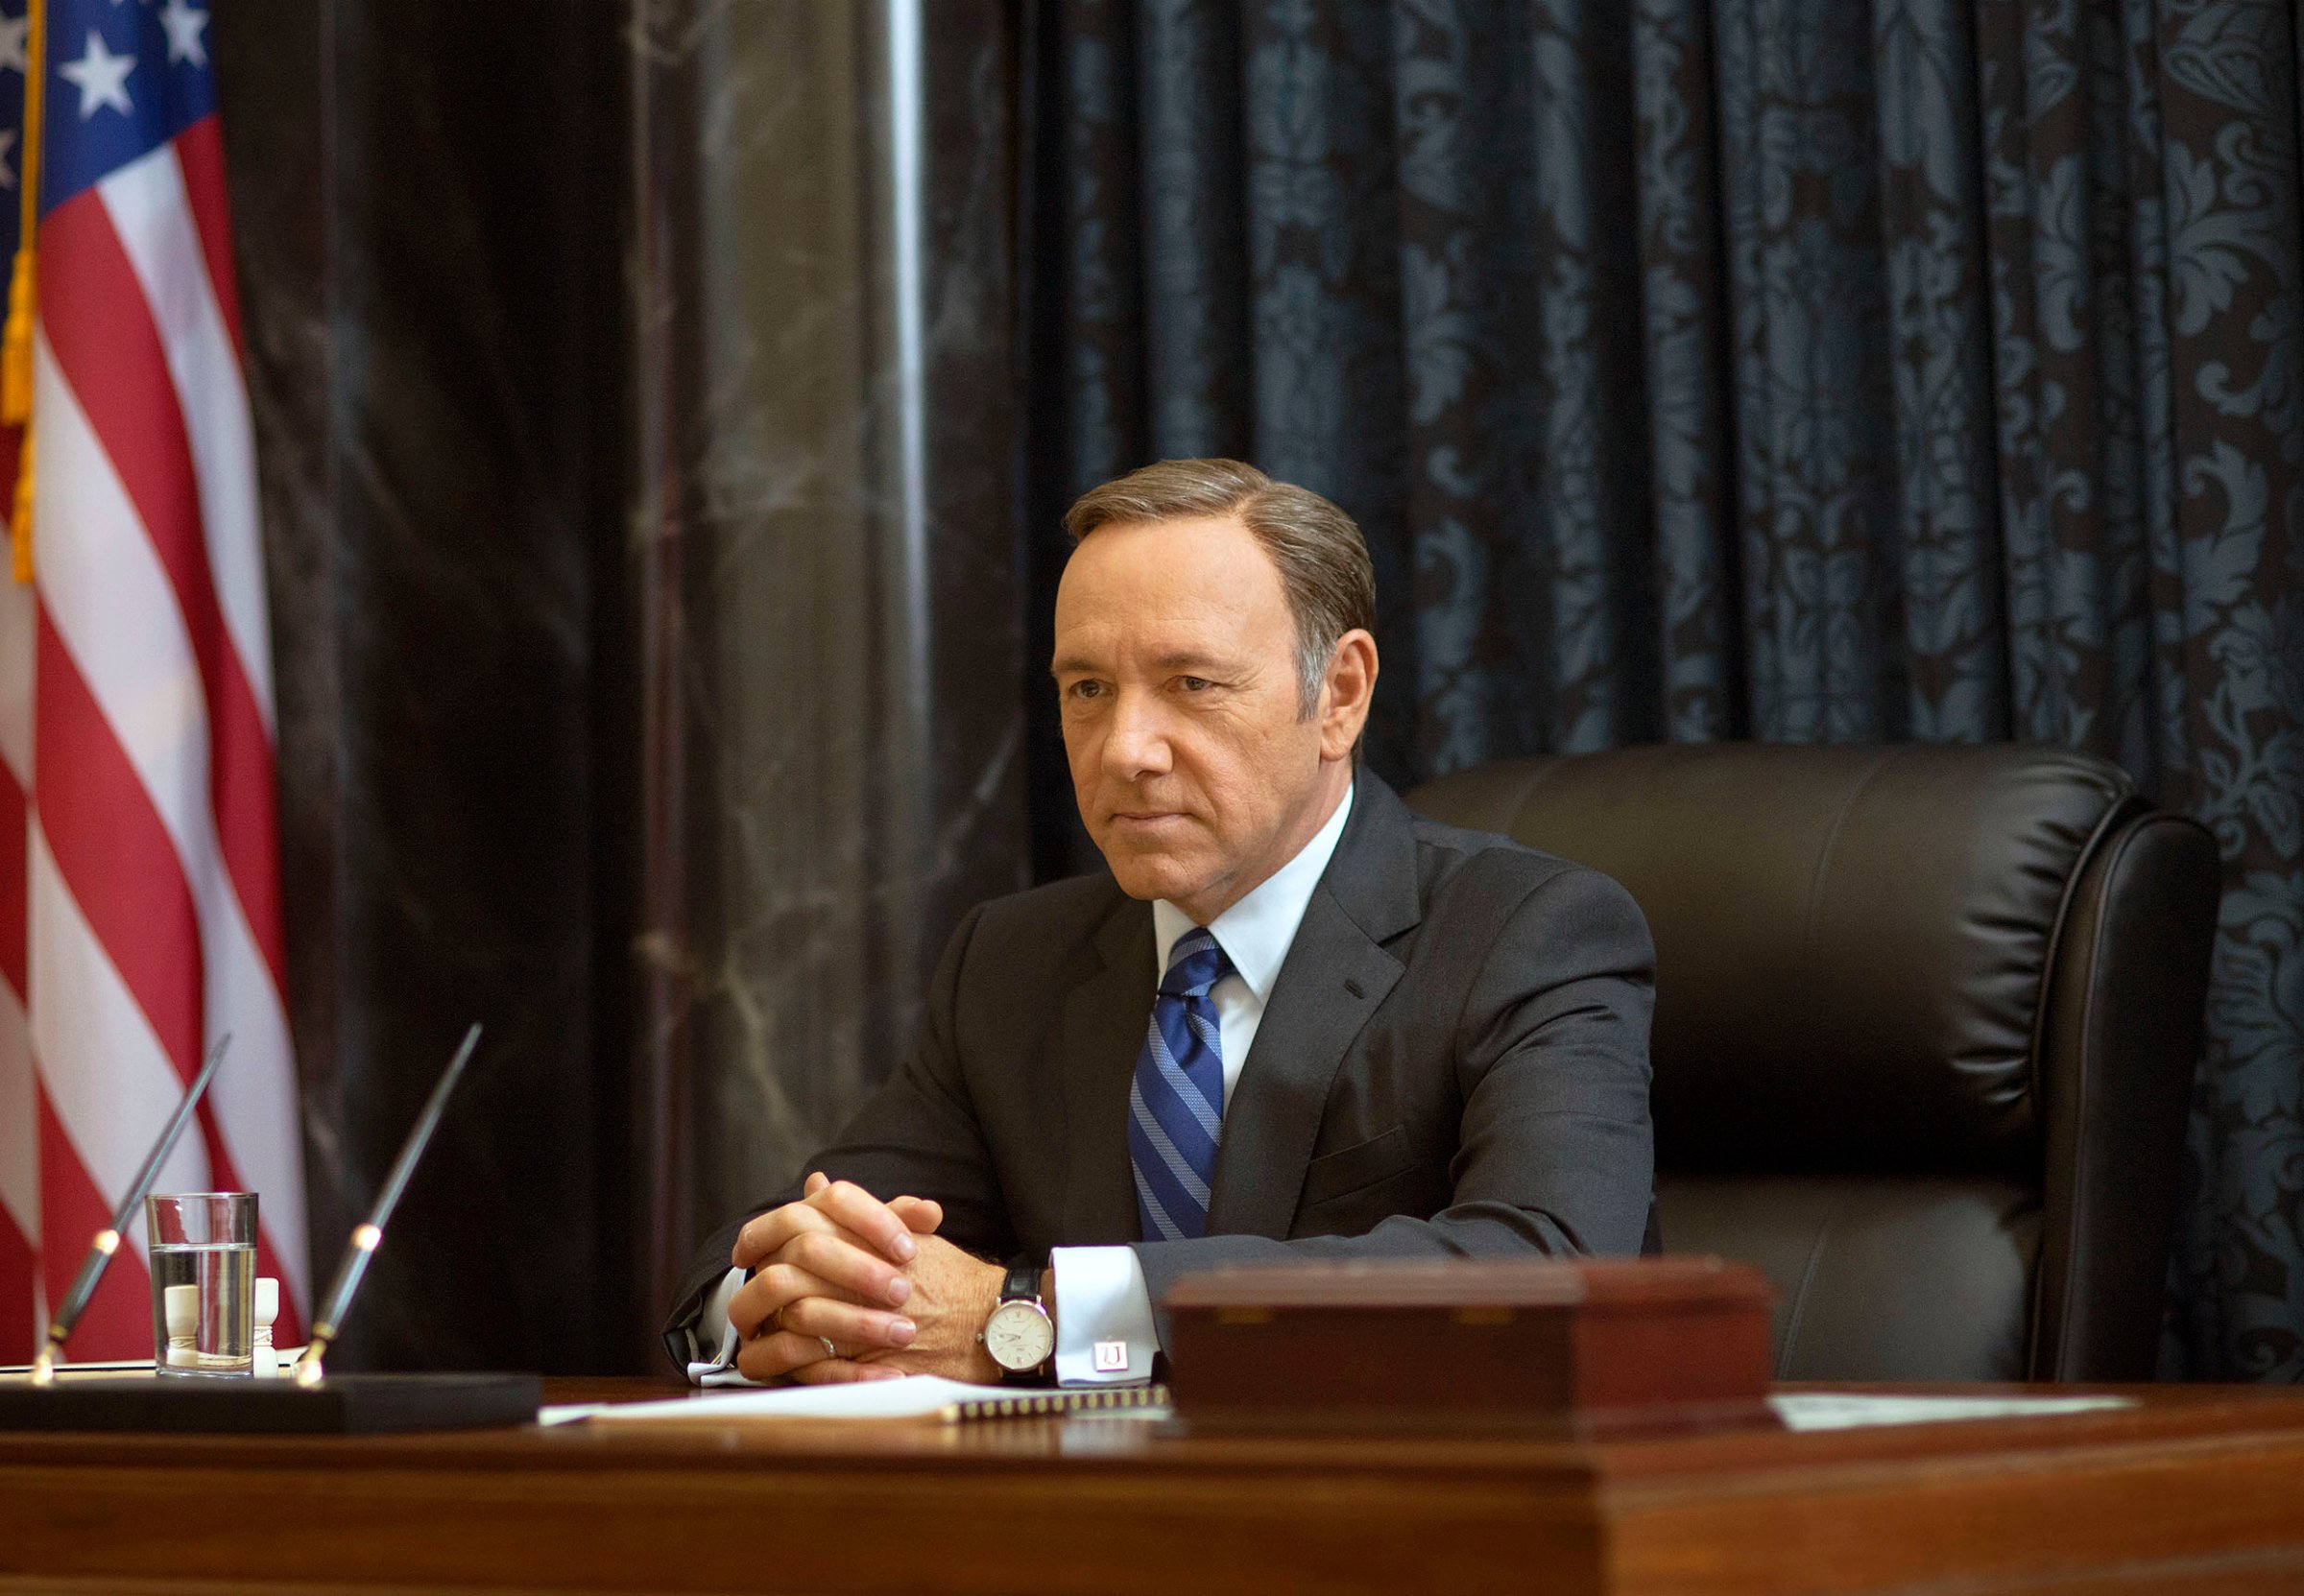 This image released by Netflix shows Kevin Spacey as Francis Underwood in a scene from "House of Cards." Frank Underwood